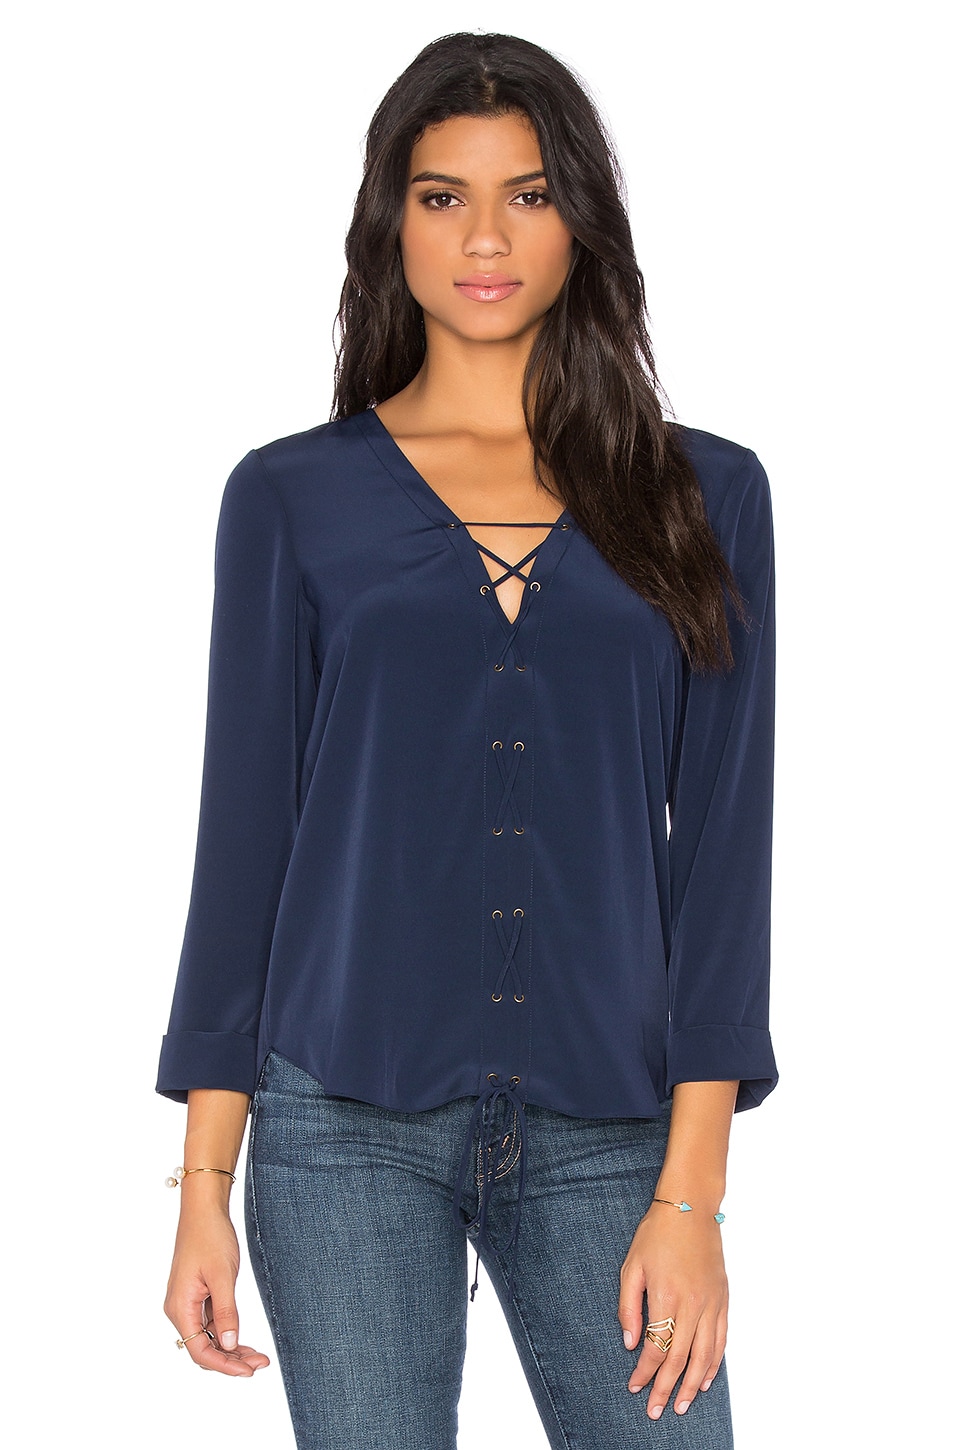 Rory Beca Bengali Blouse in Tagine | REVOLVE